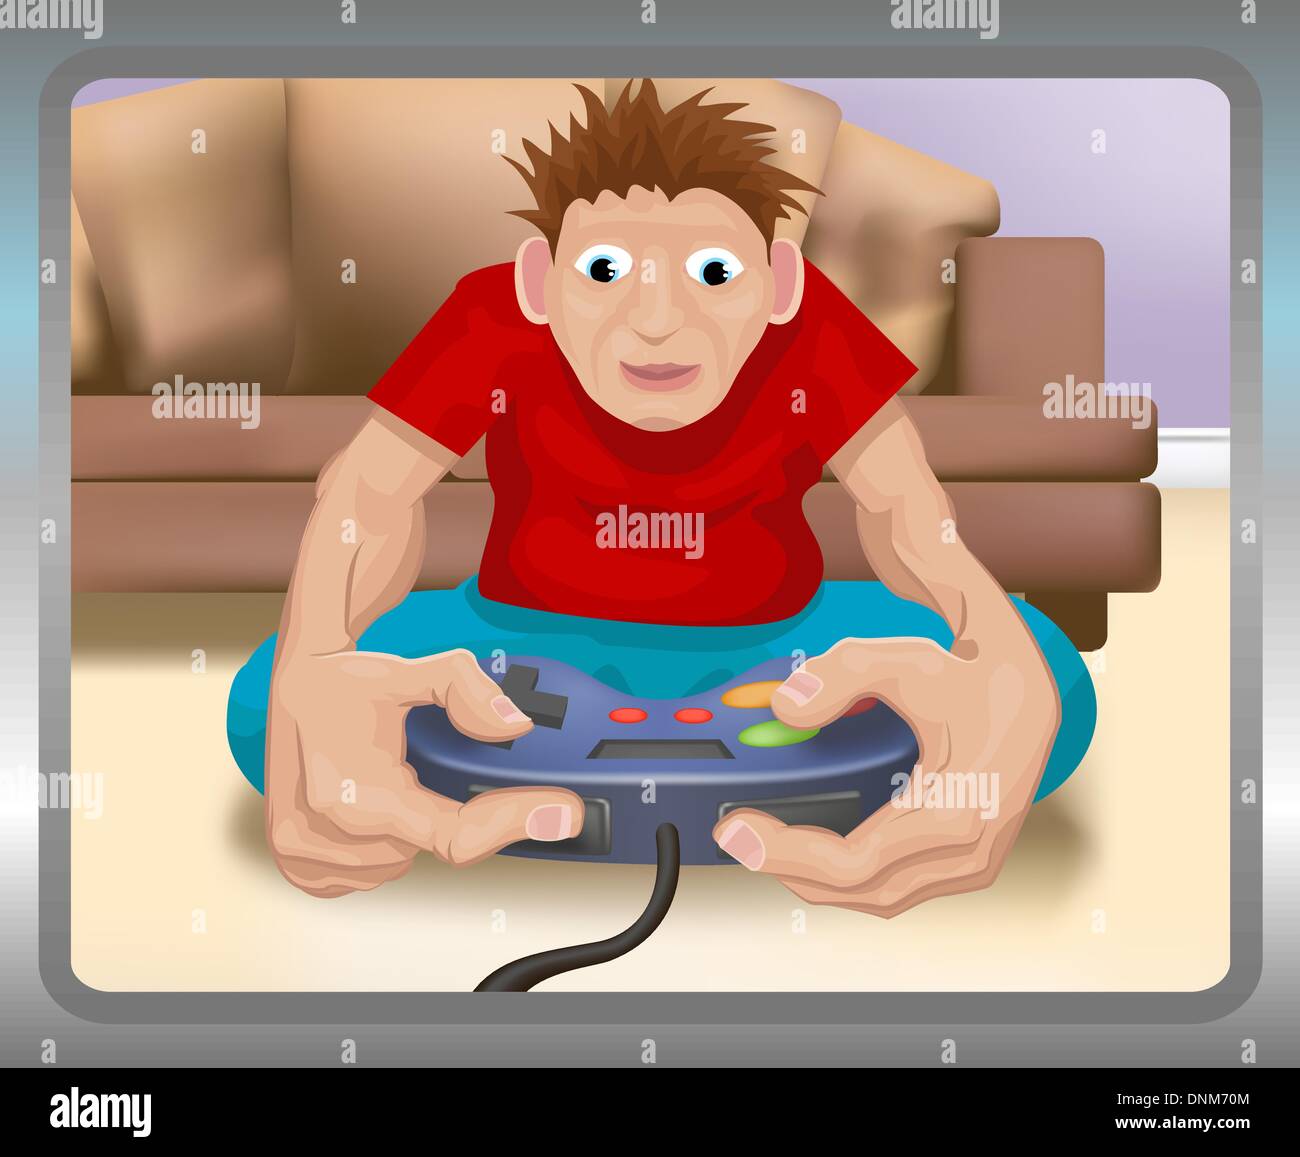 A boy playing on a games console. Stock Vector